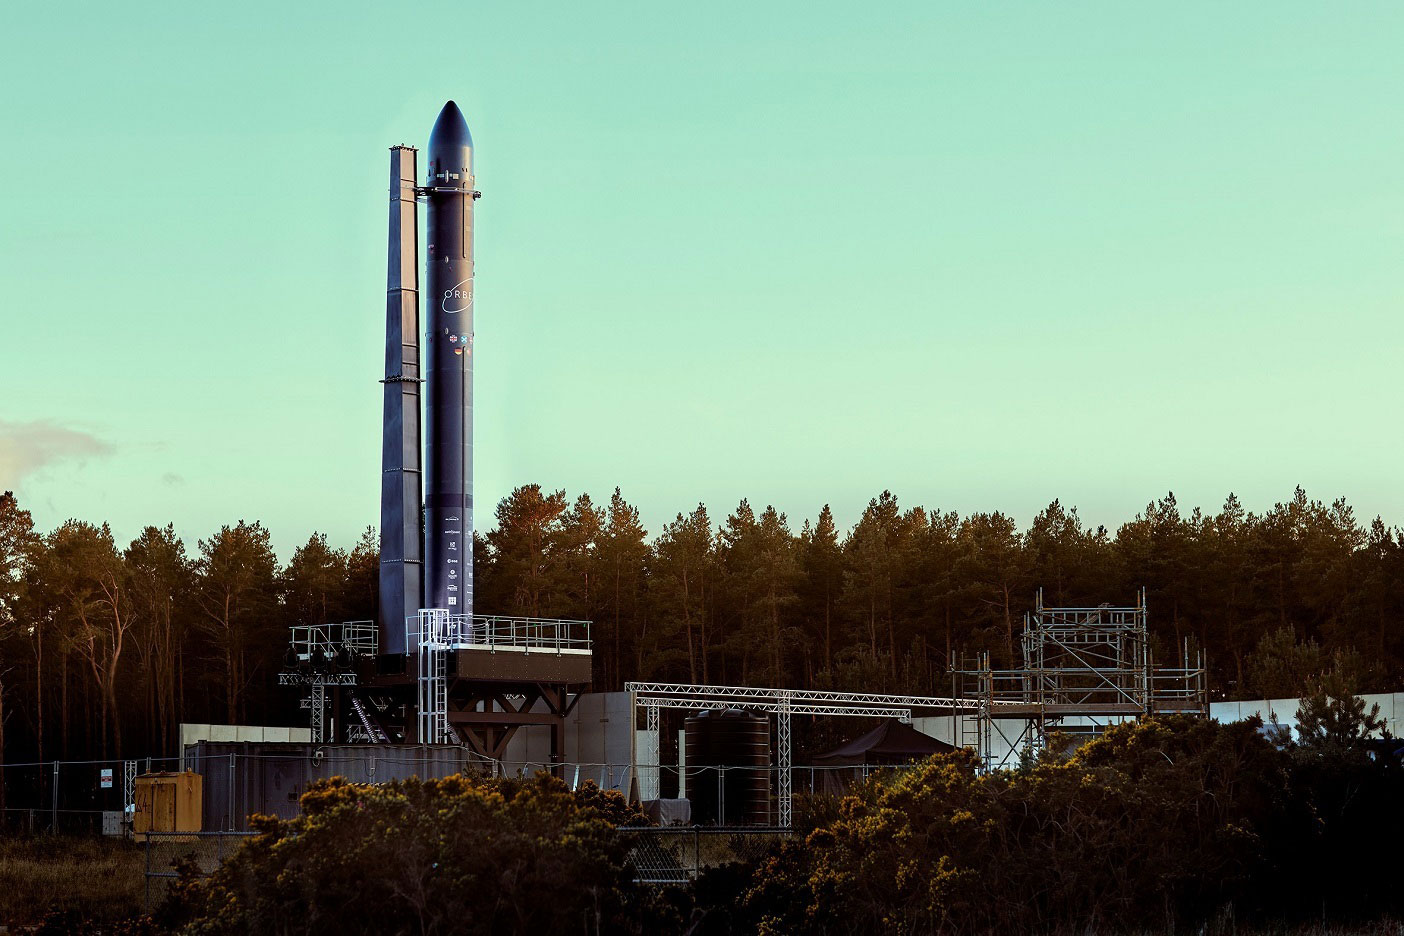 Orbex unveils Prime, Europe's first full-scale microlauncher orbital rocket.